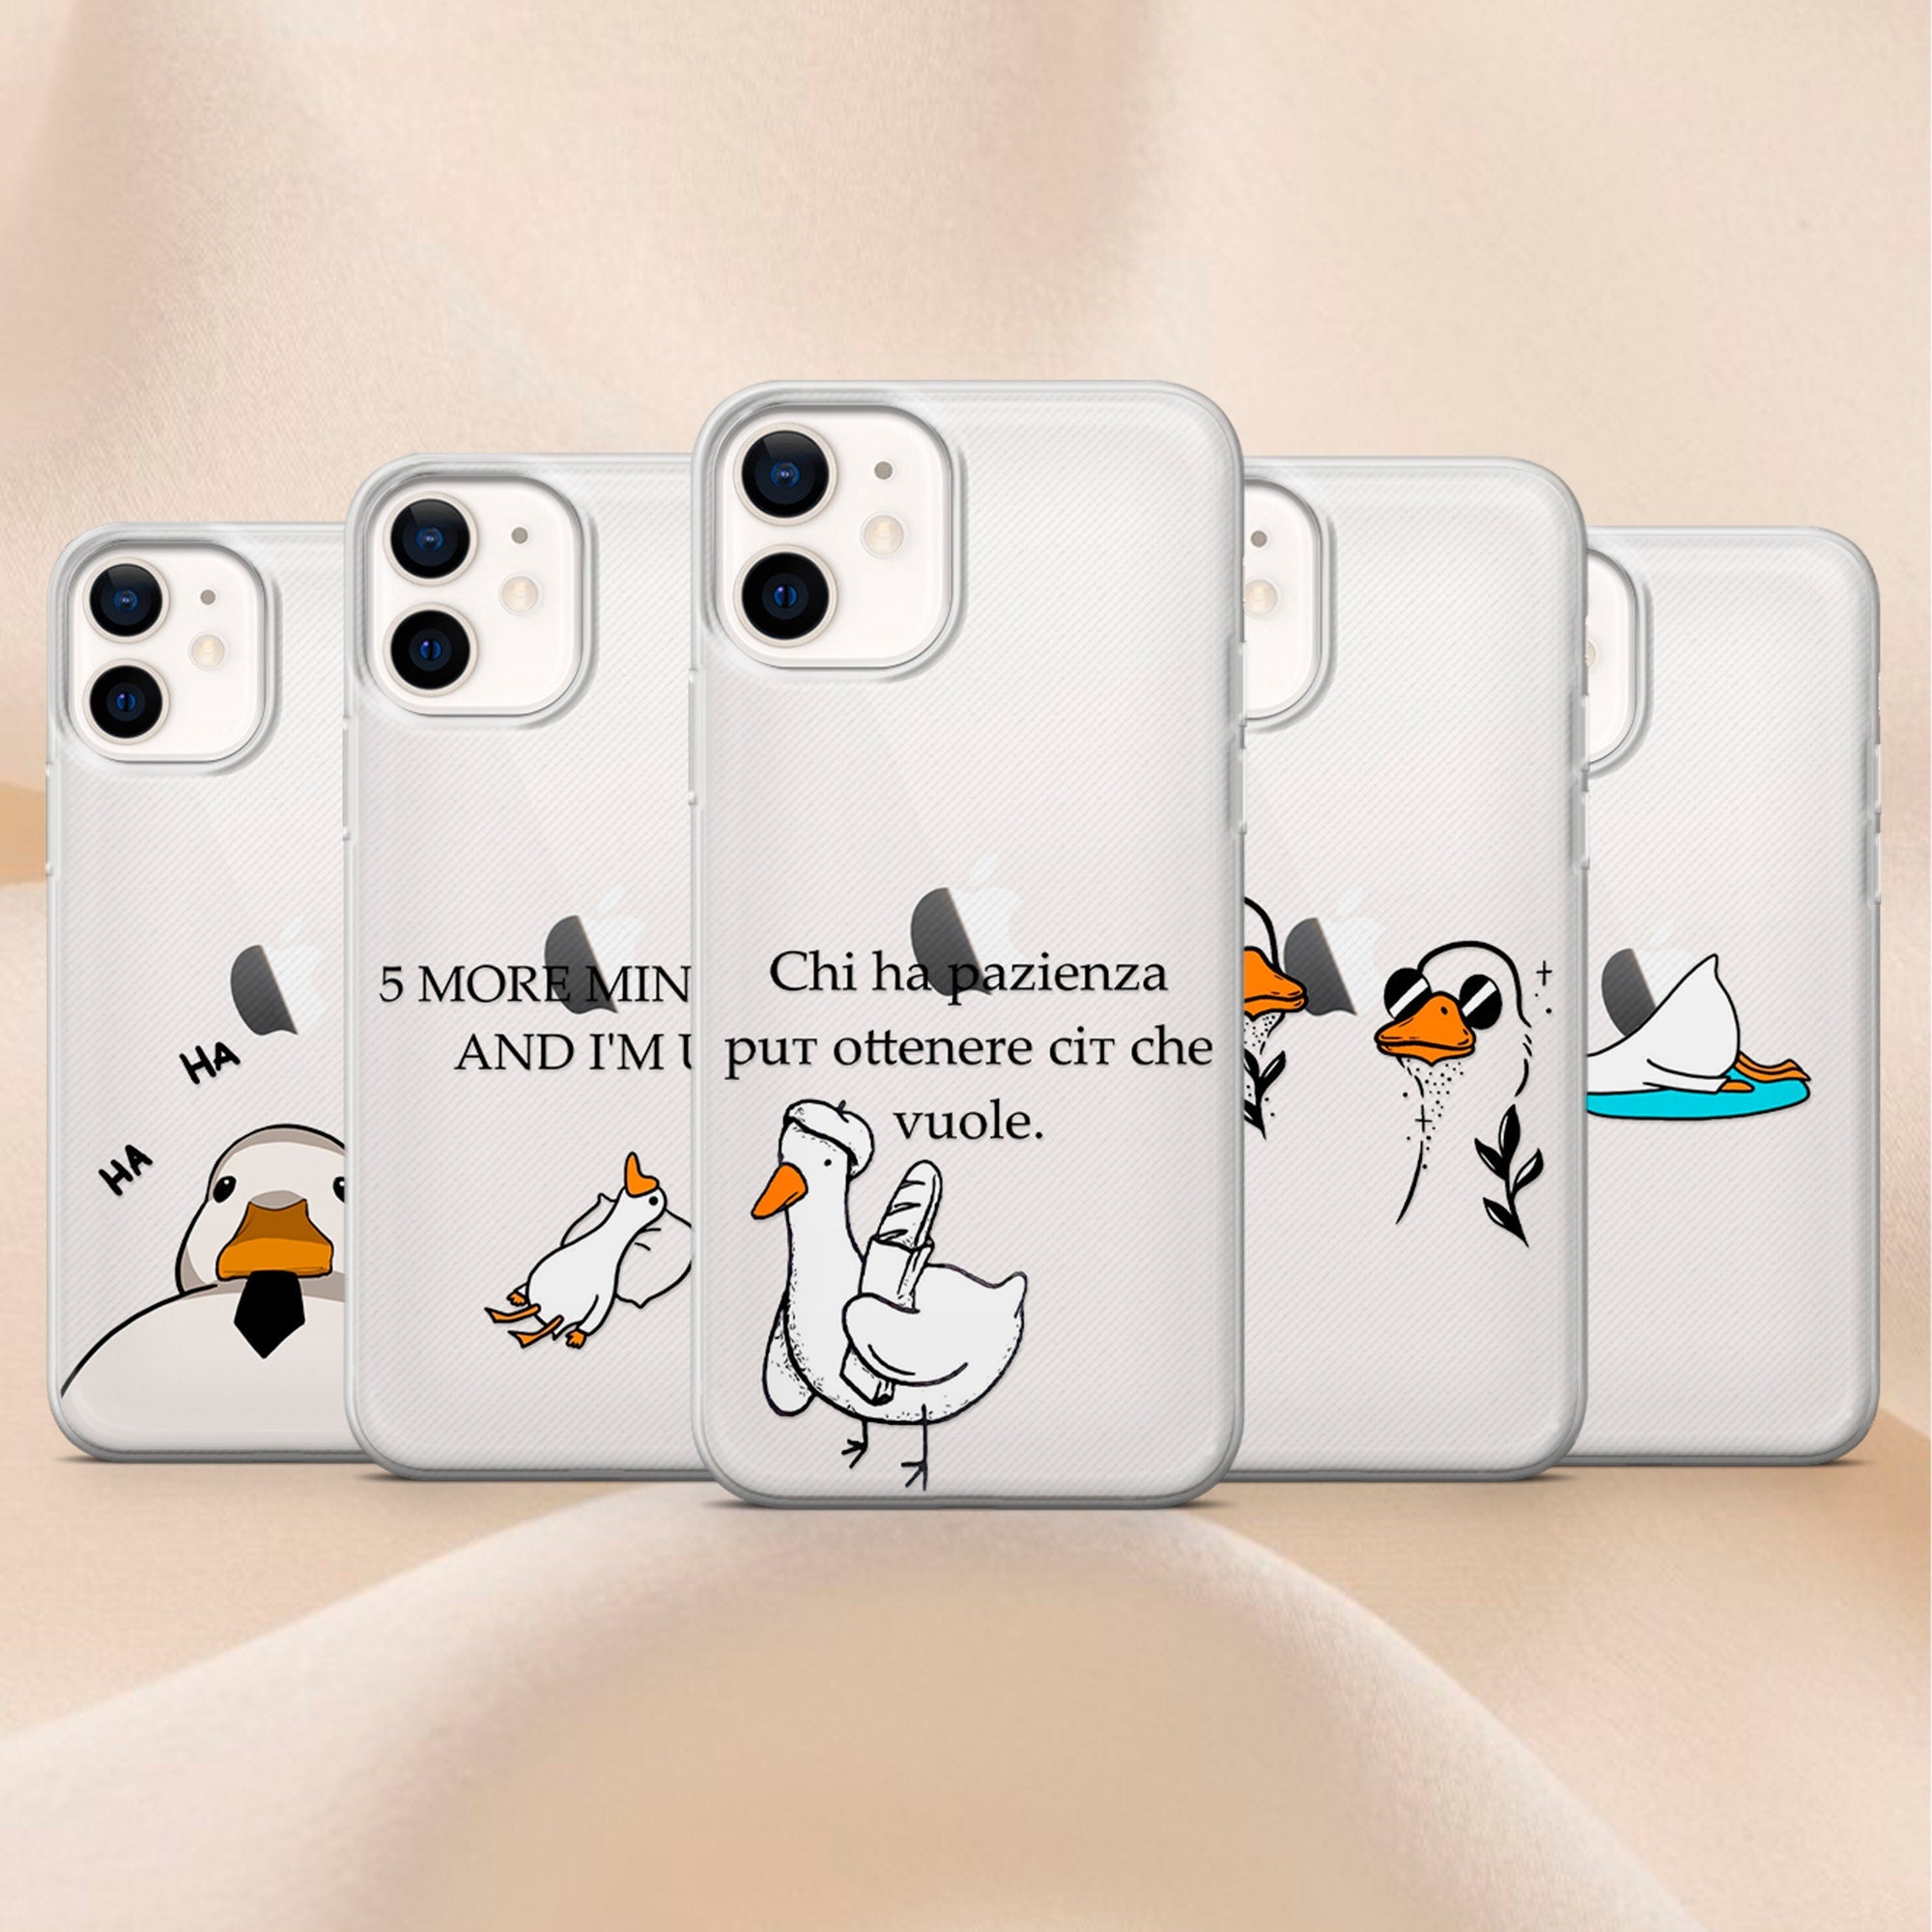 Untitled Goose Game Phone Case For Iphone 7 8 Plus X Xs Max Xr 11